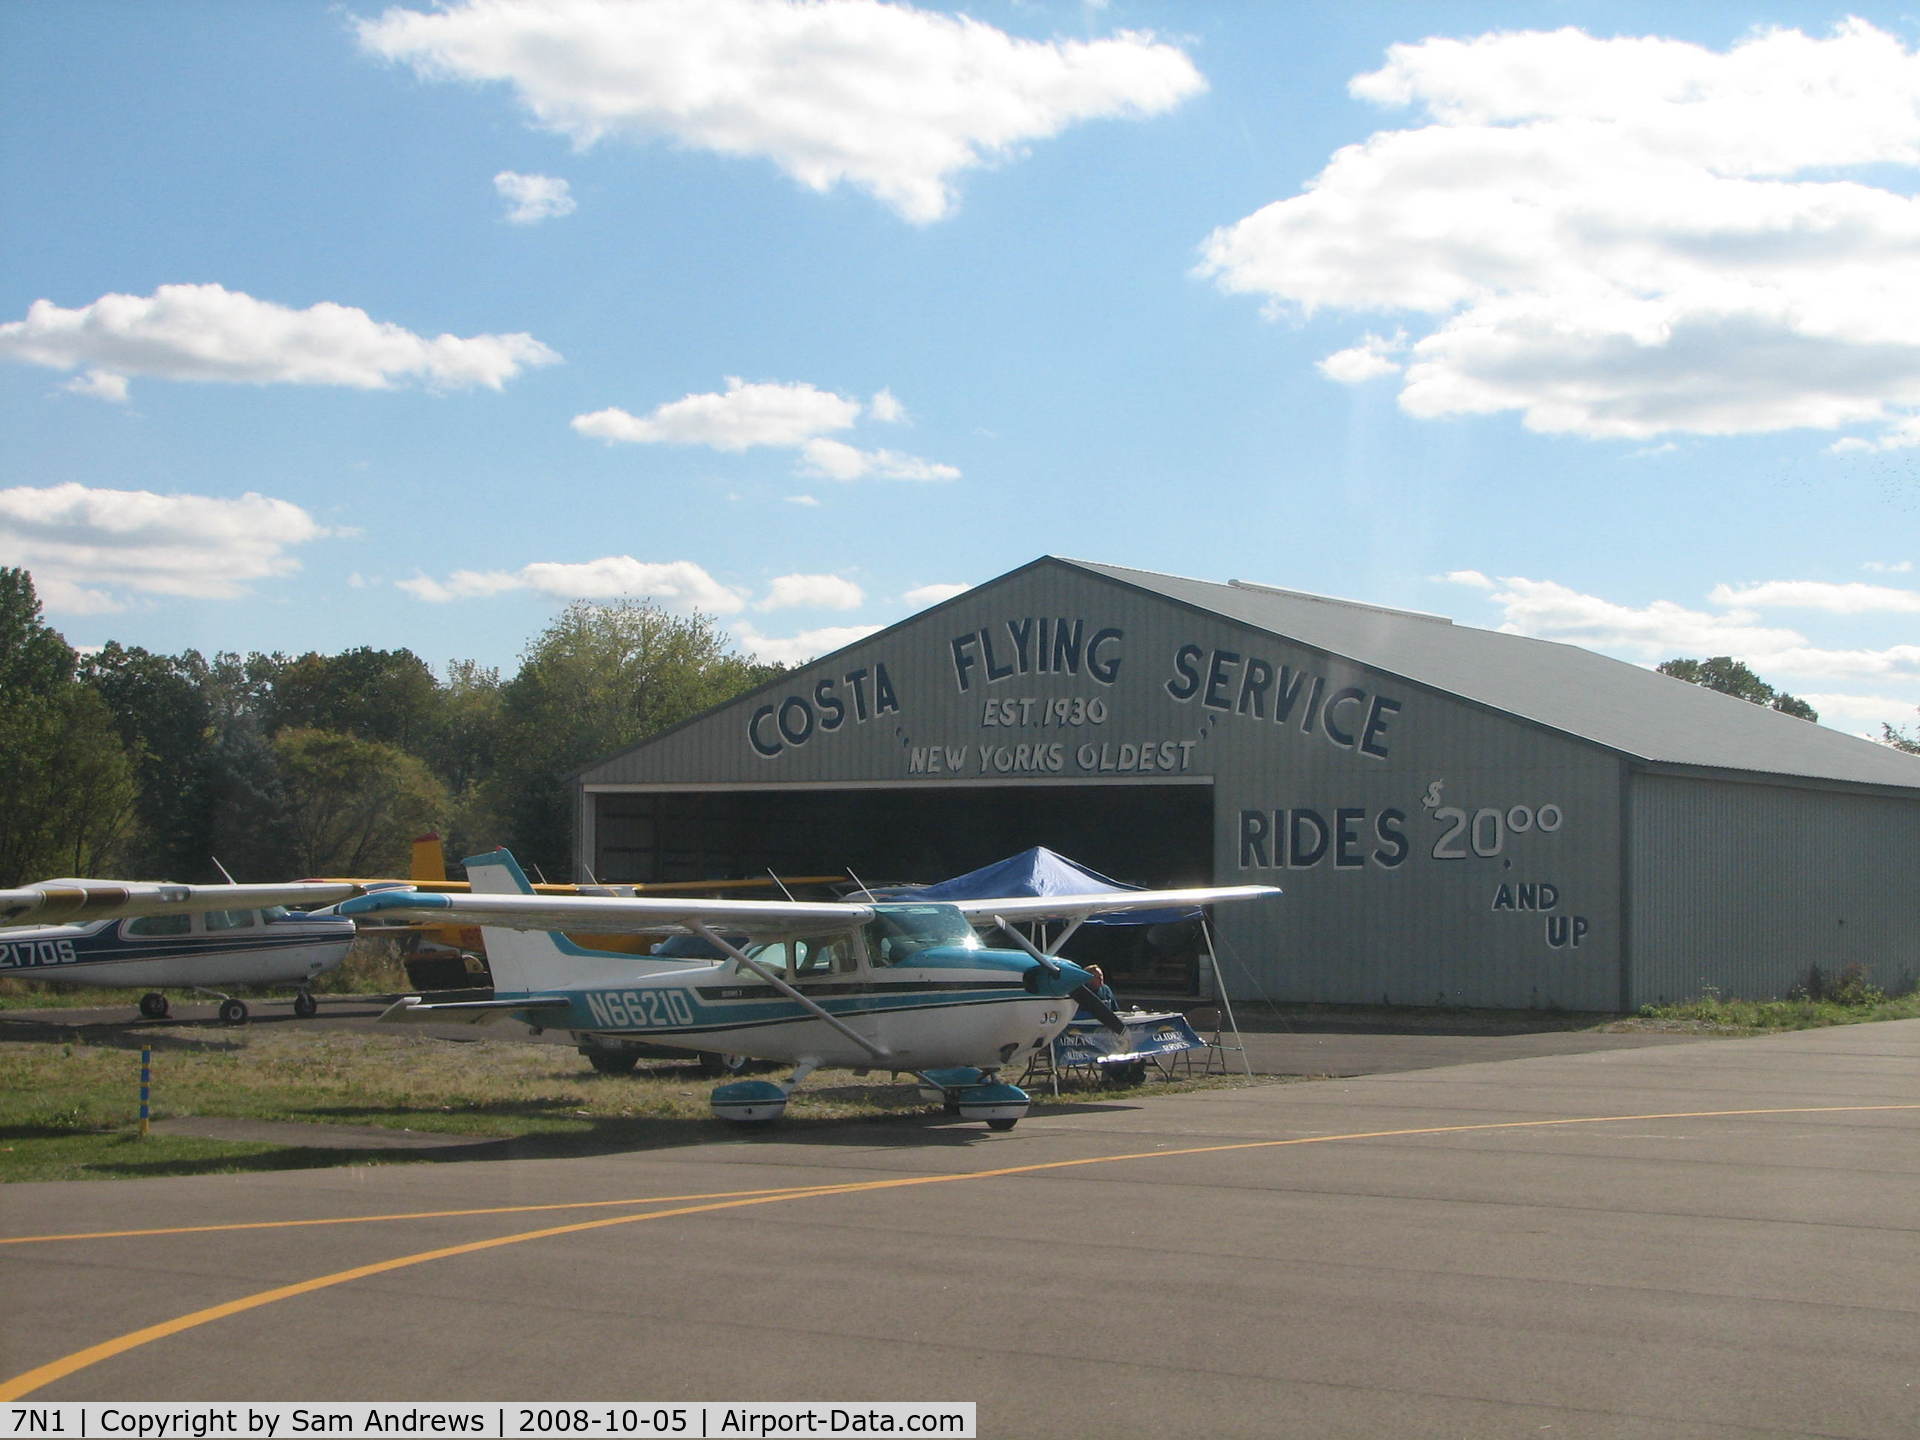 Corning-painted Post Airport (7N1) - The old flying service